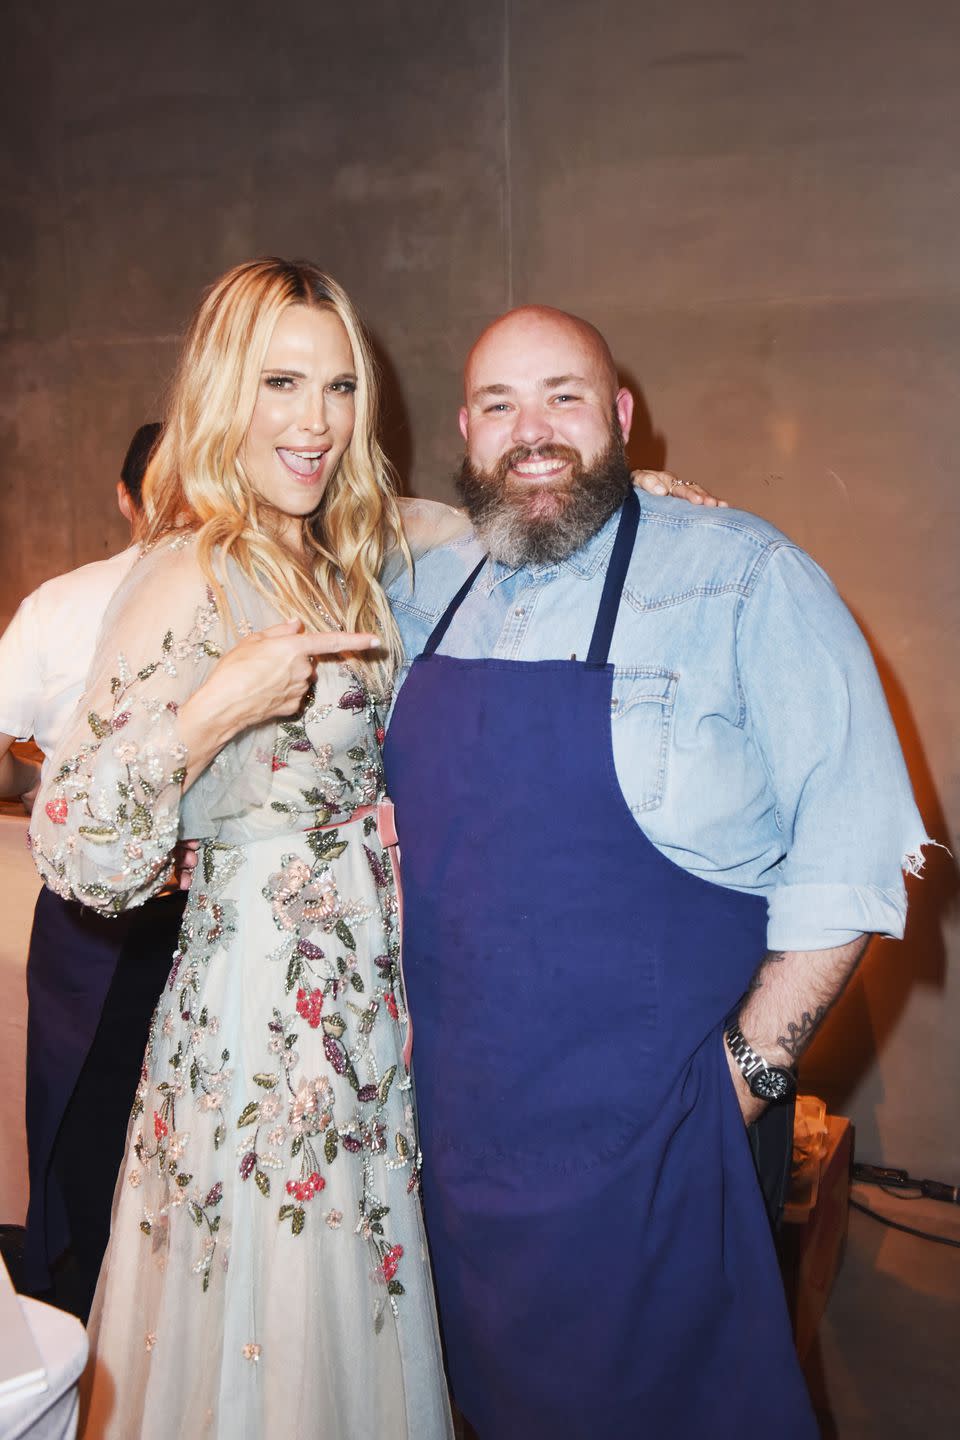 Molly Sims and Evan Funke of Felix